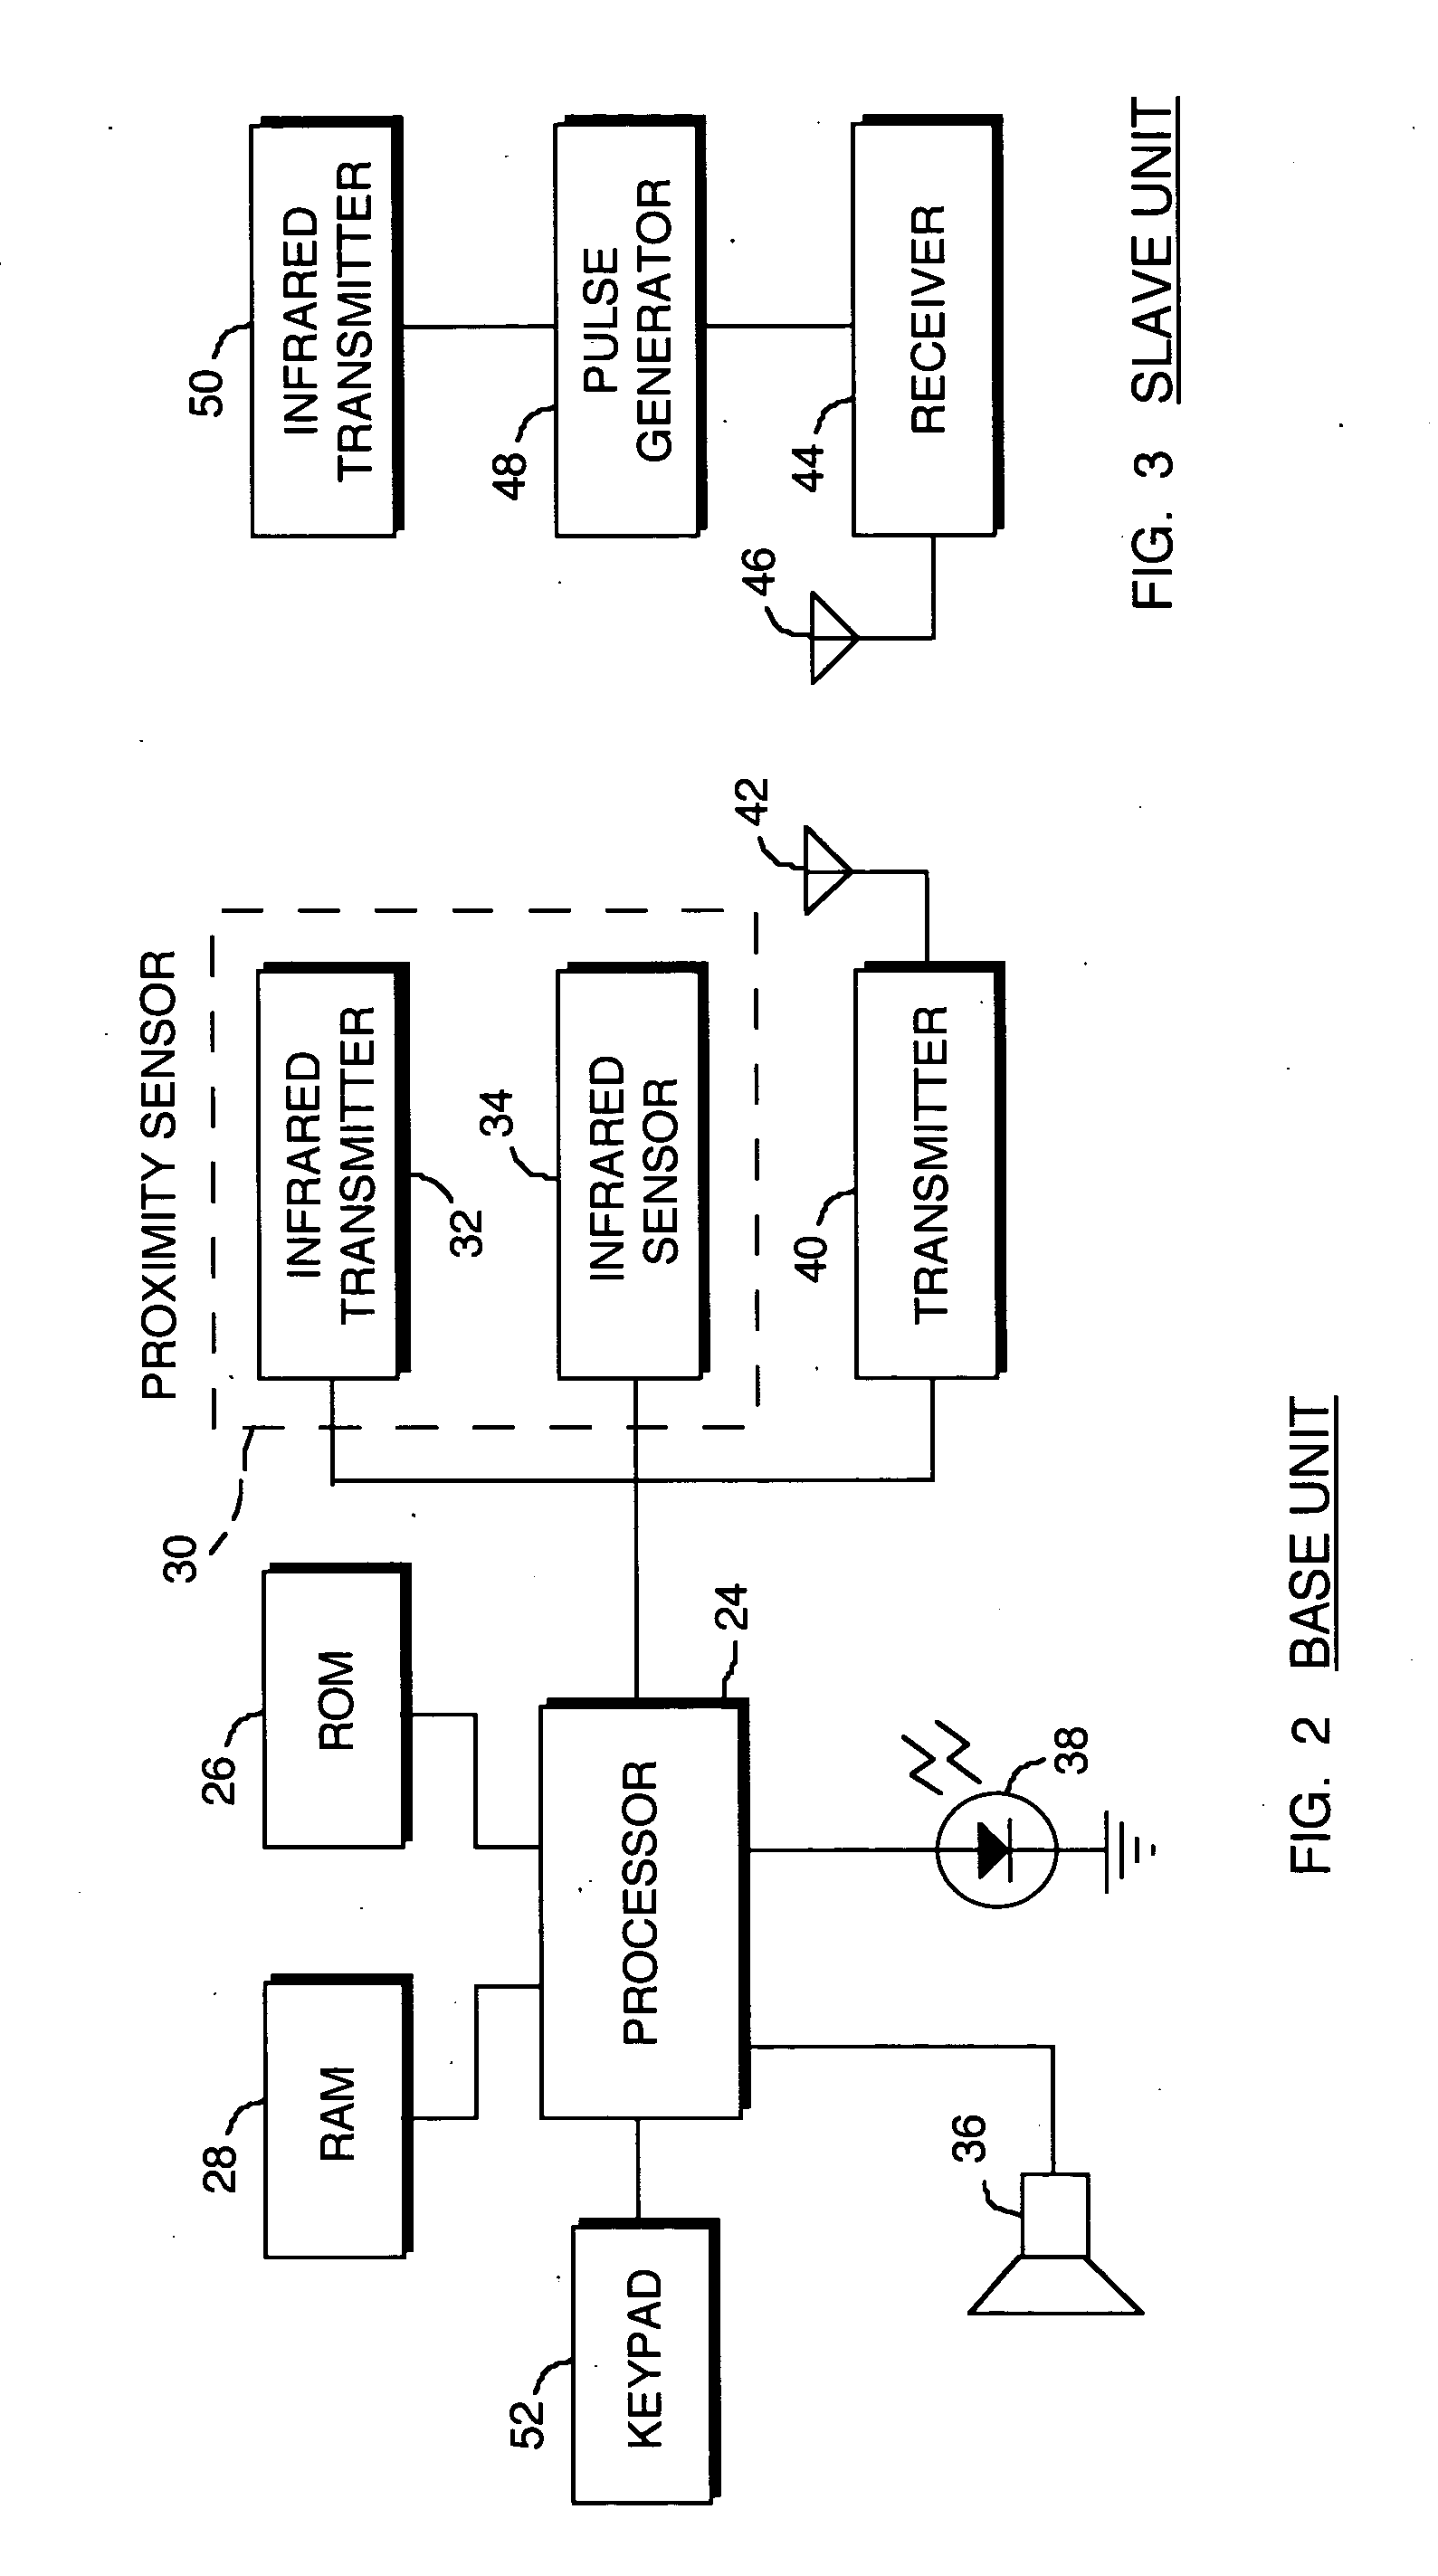 Controlling viewing distance to a television receiver